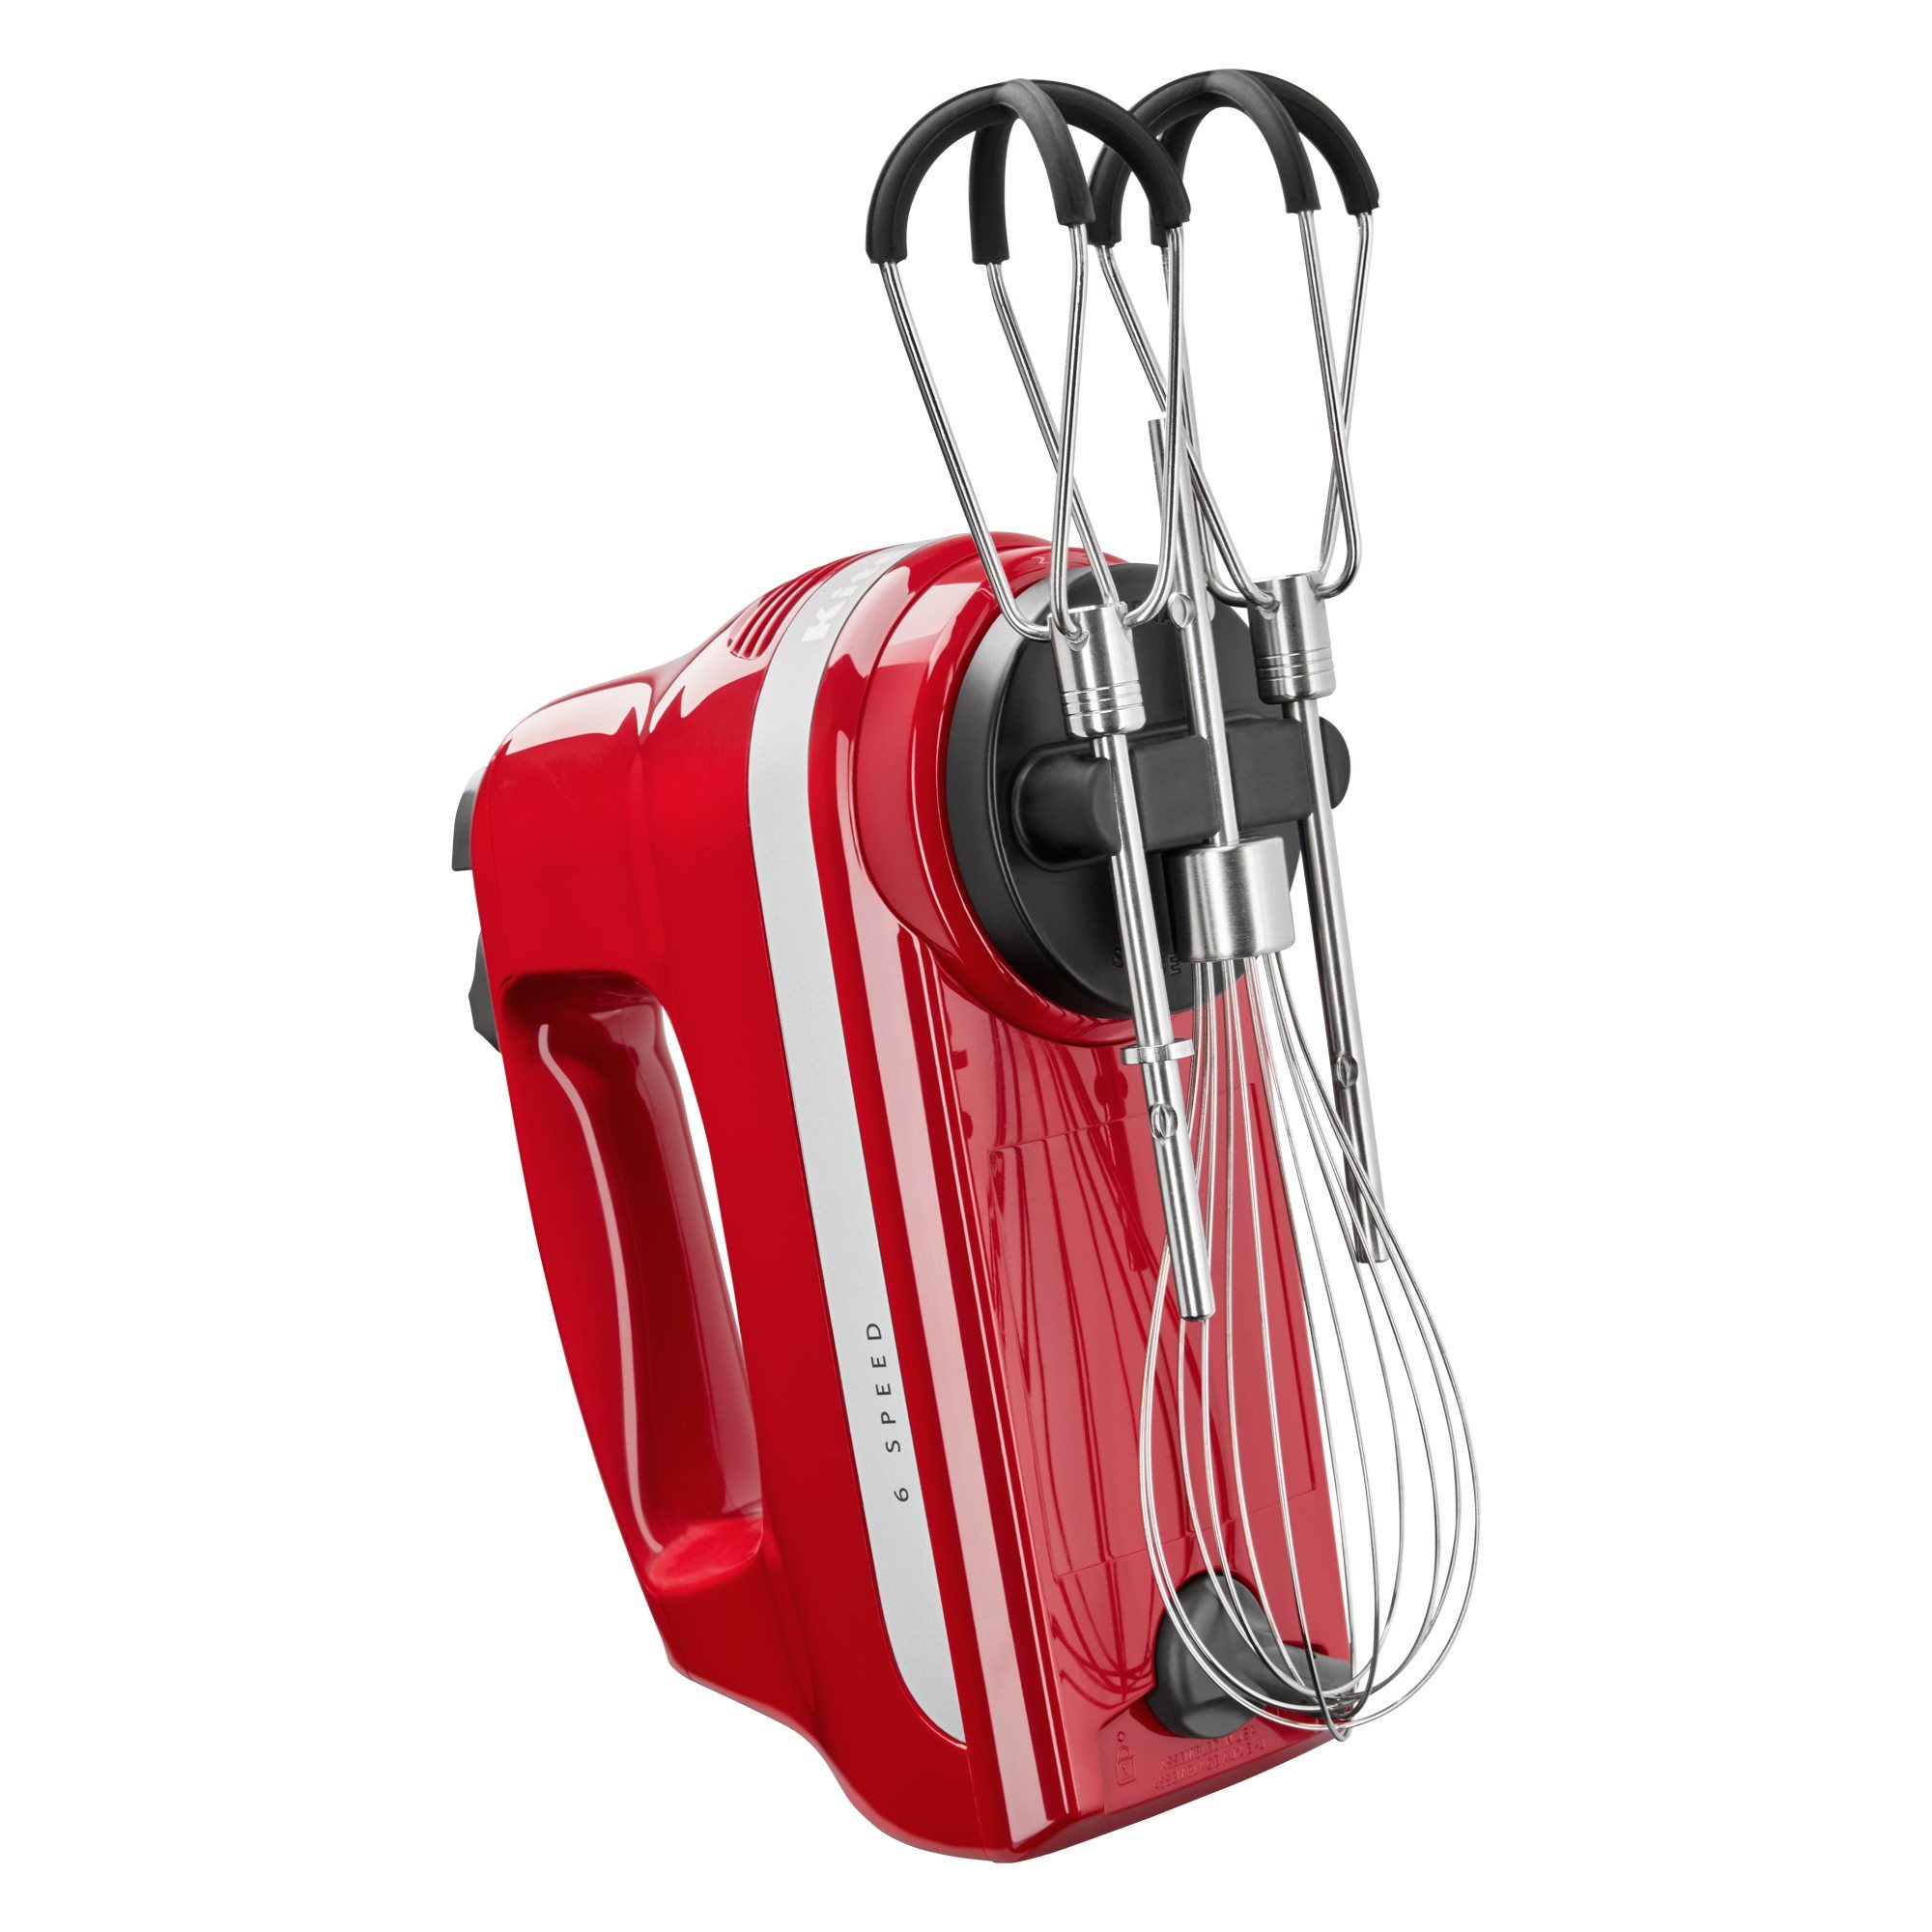 KitchenAid 5-Speed Ultra Power Hand Mixer - Empire Red - Spoons N Spice